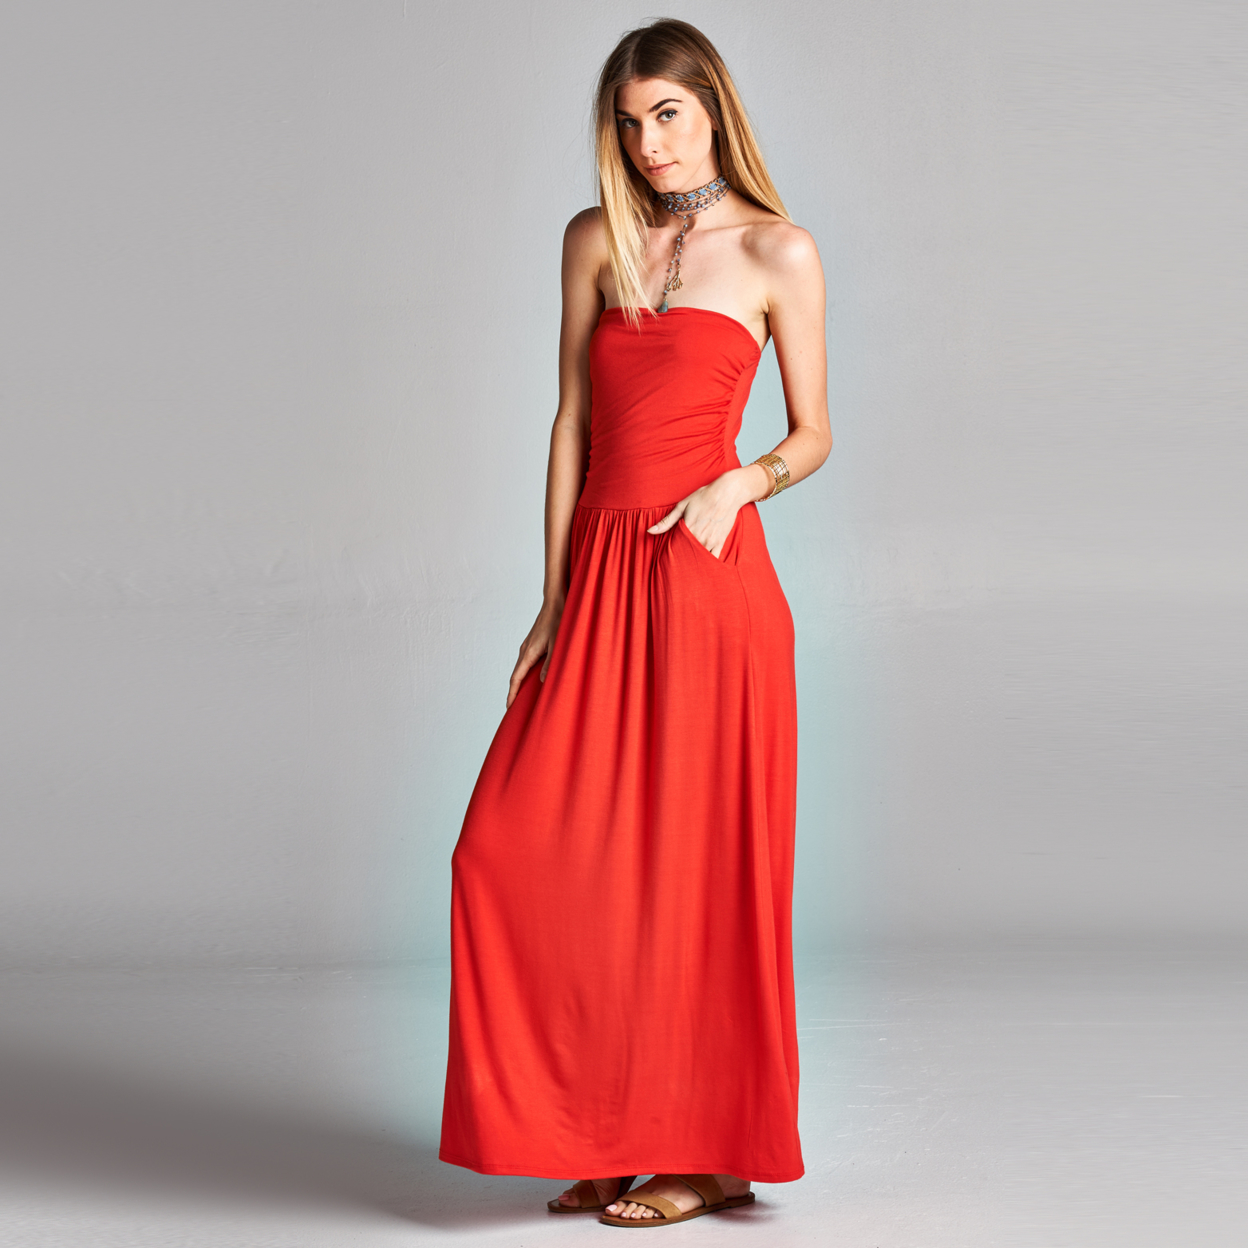 Atlantis Strapless Maxi Dress With Pockets In 6 Colors - Red, Small (4-6)